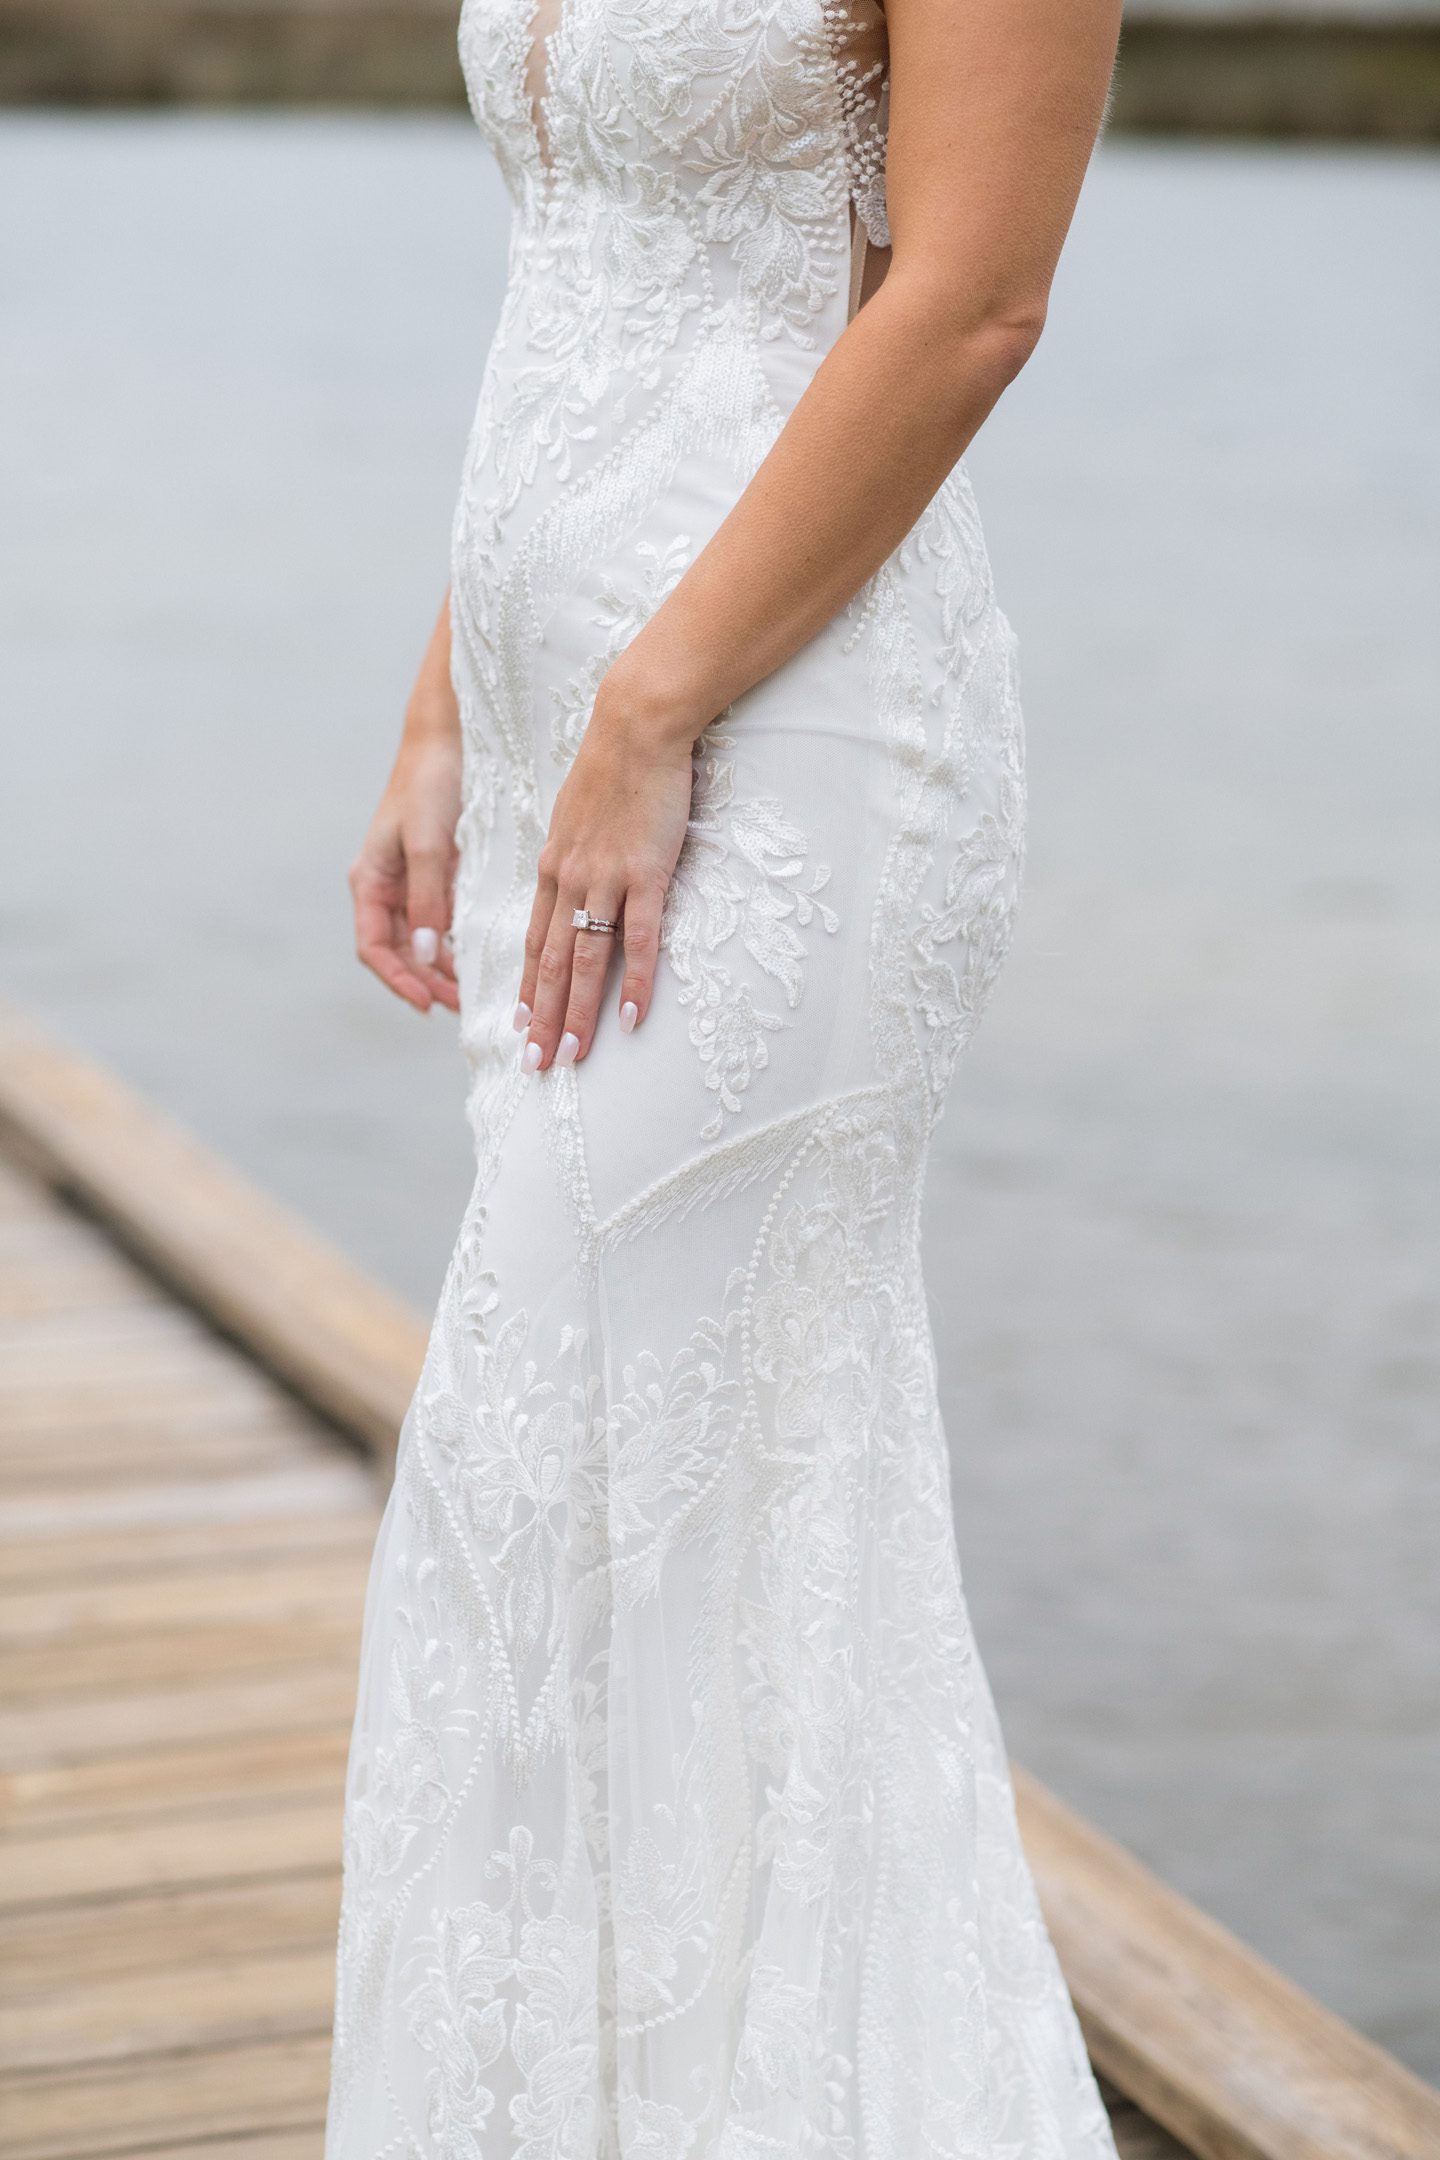 Wedding dress and ring detail